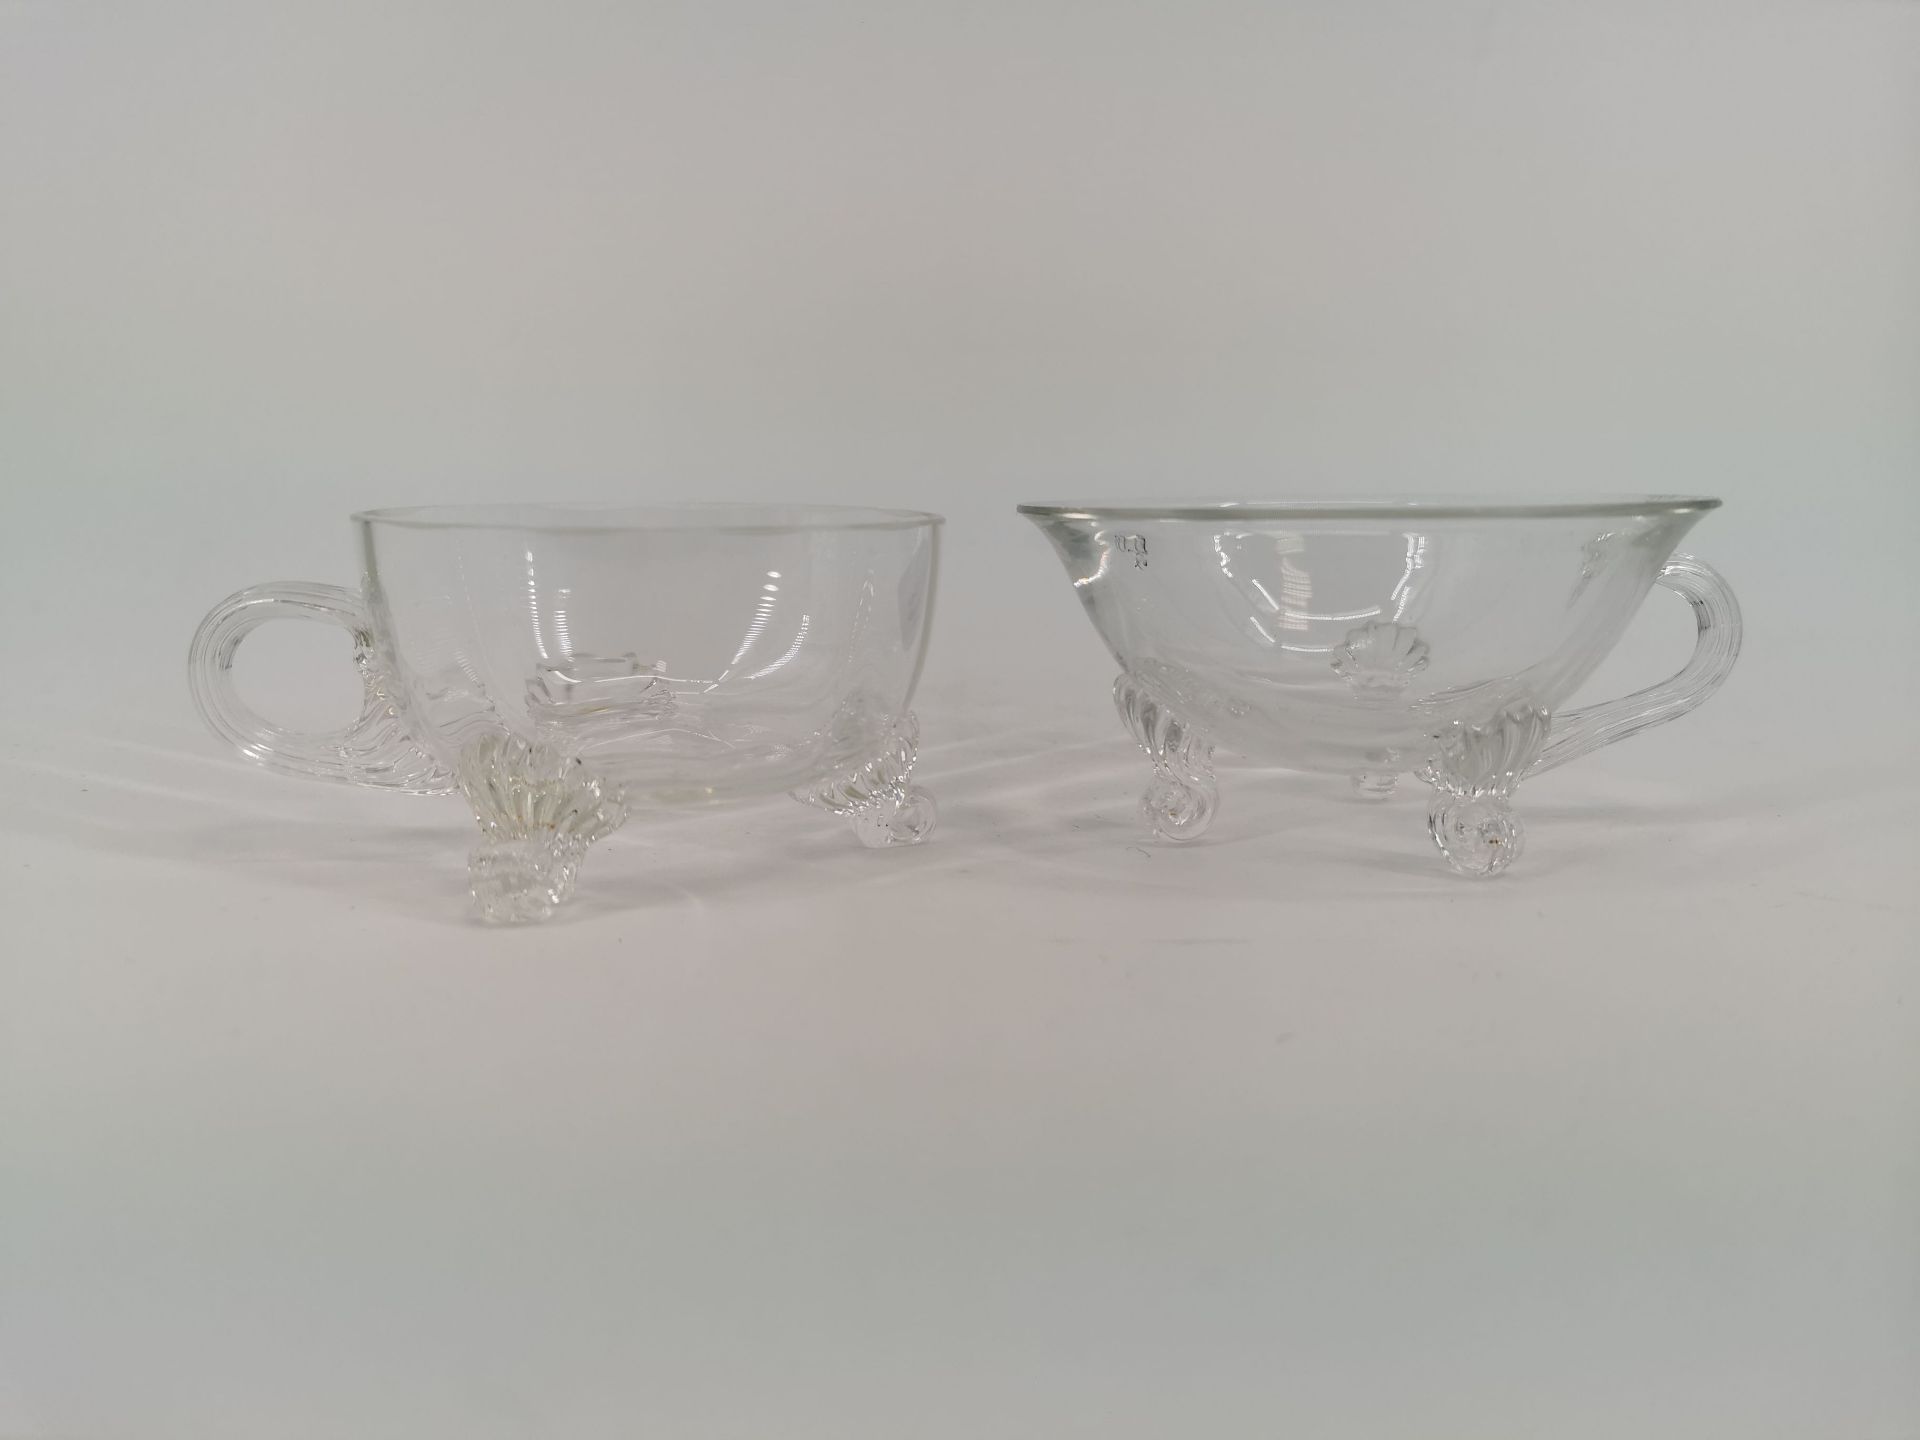 2 MURANO CUPS - Image 3 of 3